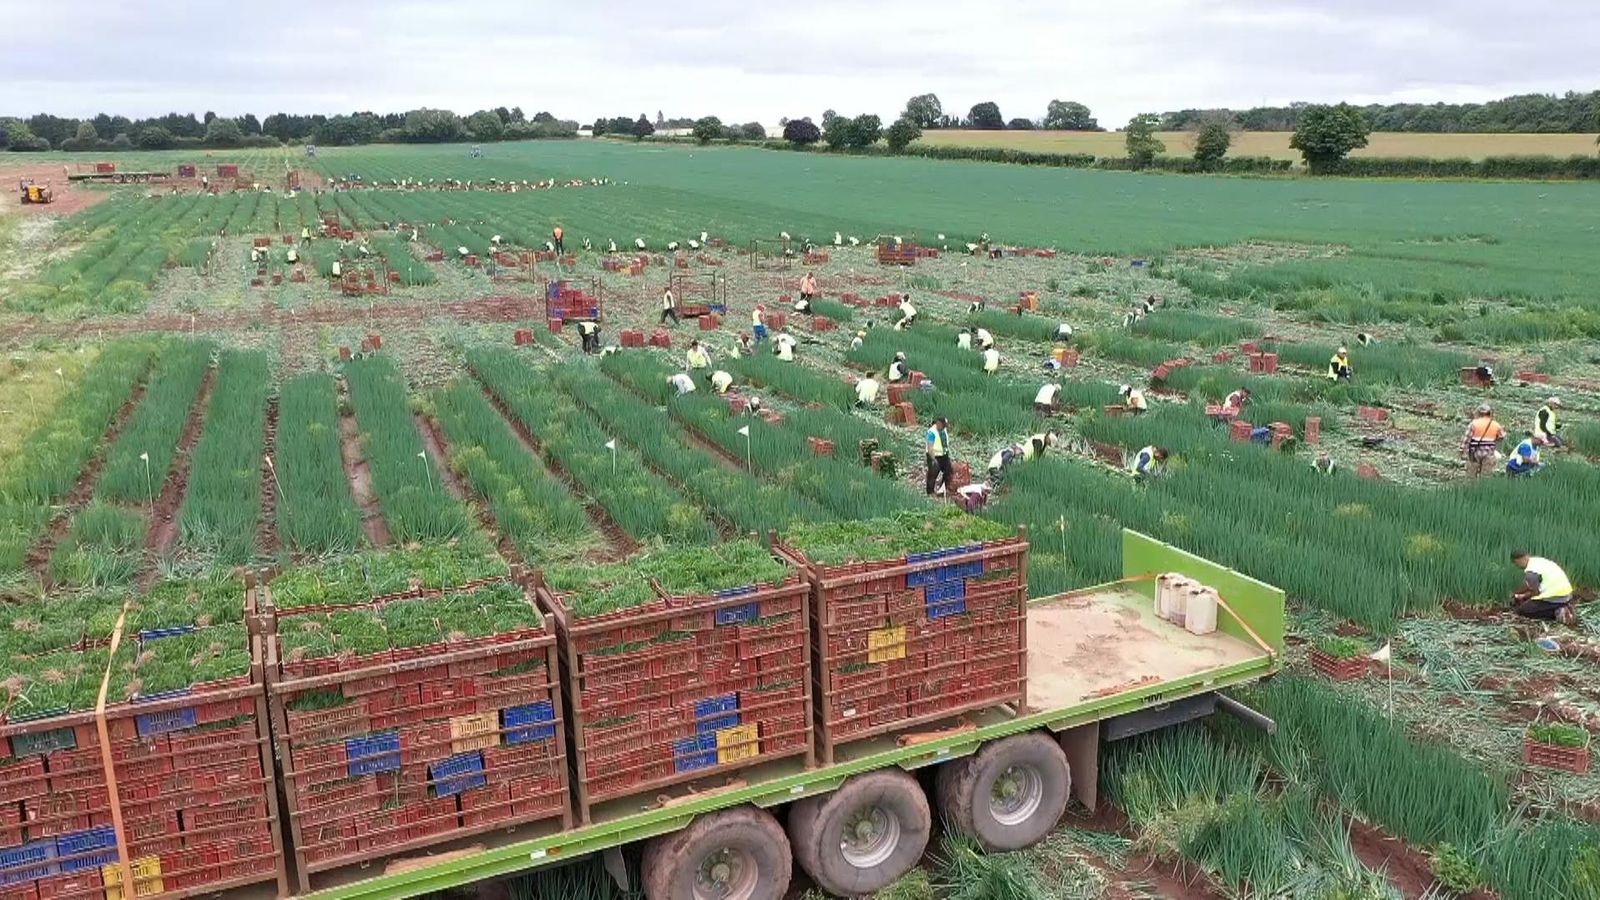 Labour shortages leave tonnes of food unpicked on British farms